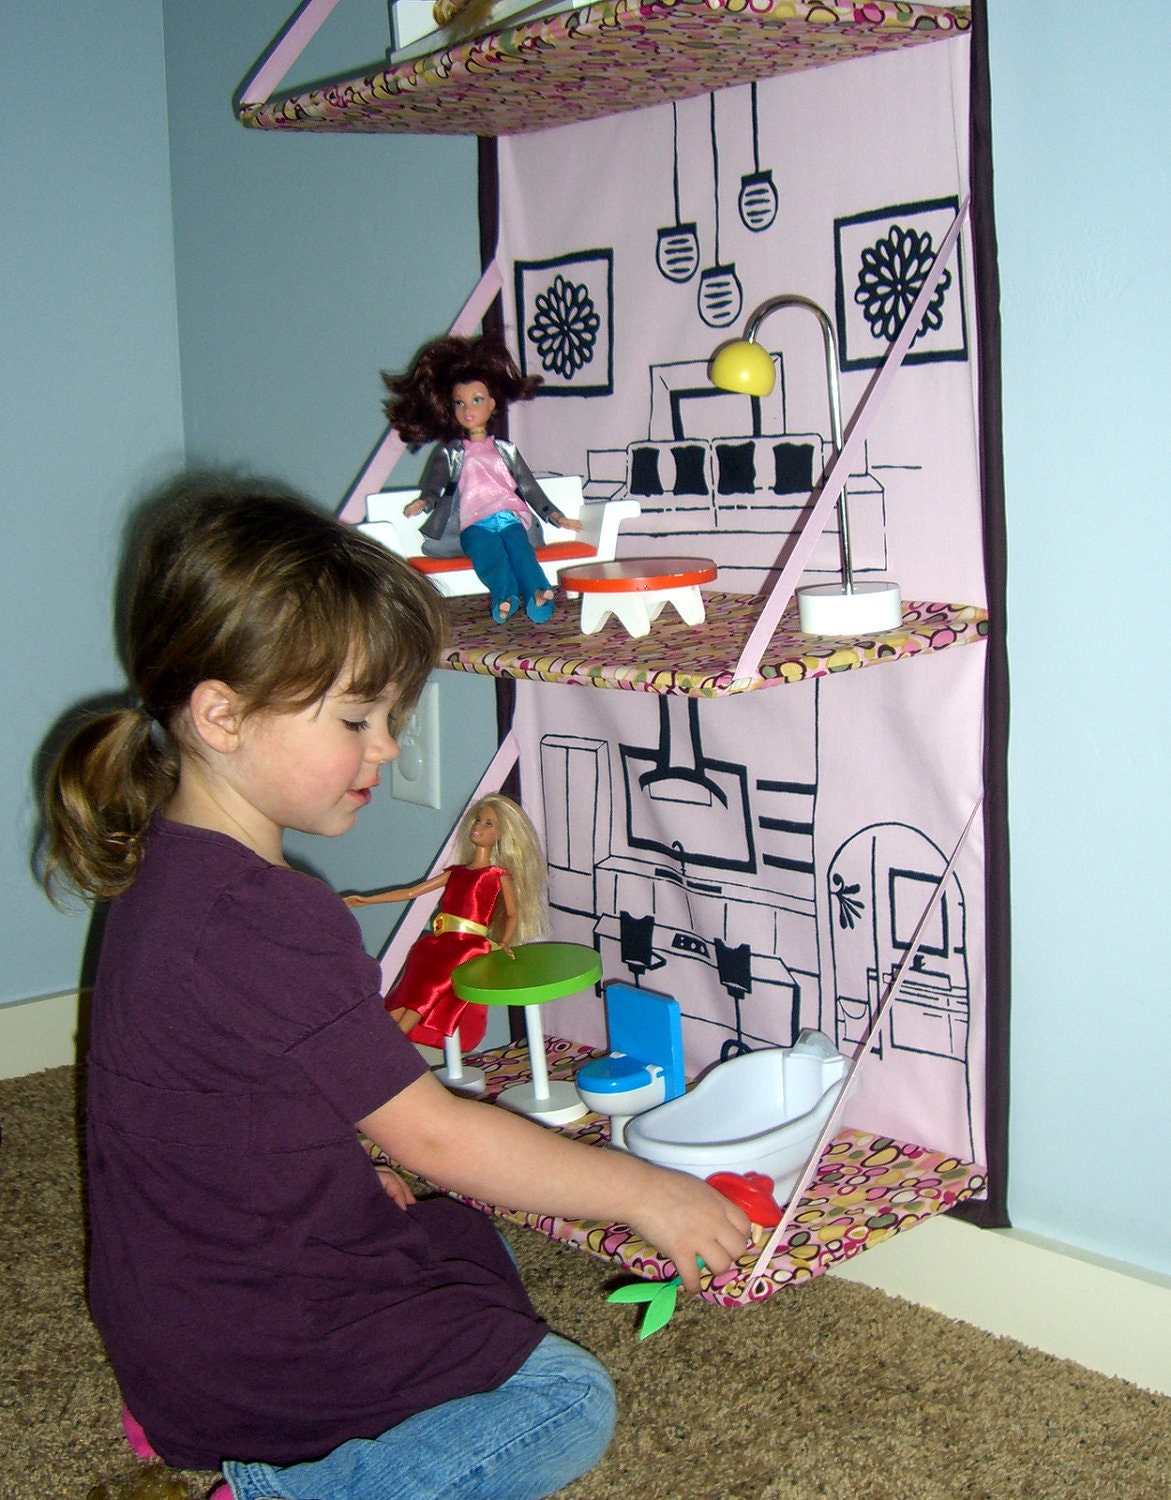 SALE 20% off. Folding fabric Doll House e-pattern. Store away when not using.